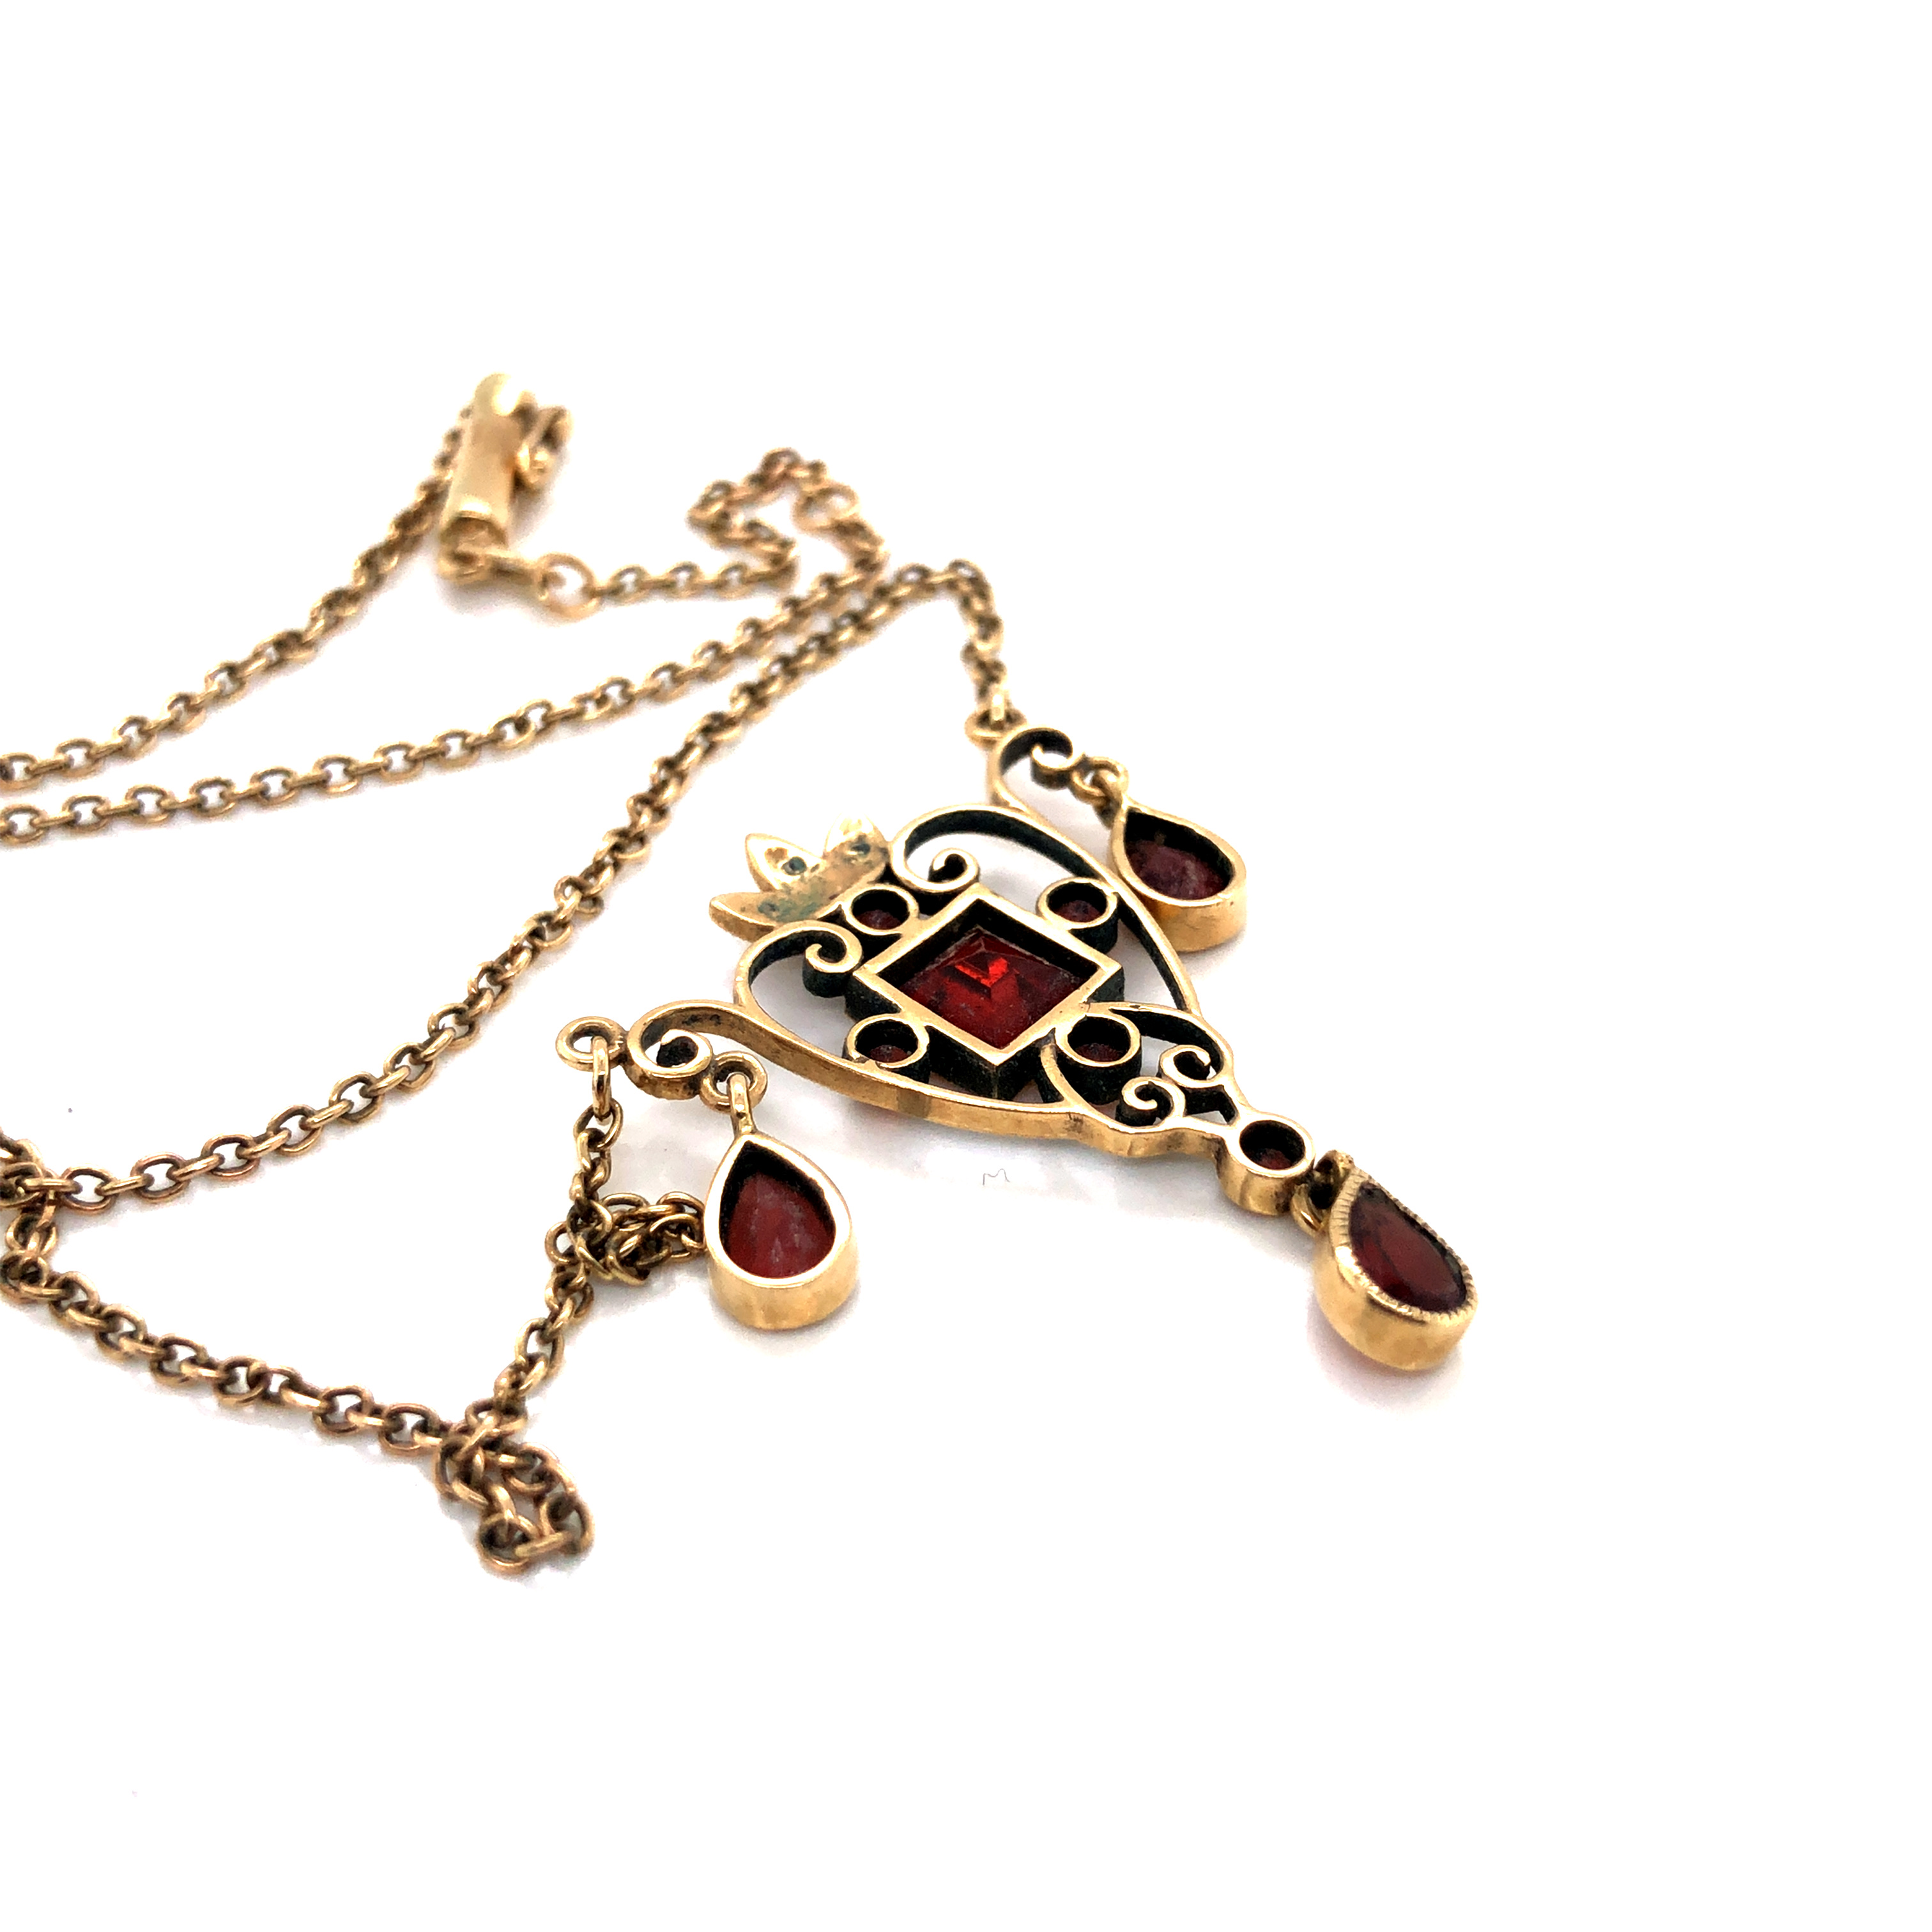 A 9ct HALLMARKED GOLD, GARNET AND SEED PEARL LAVALIERE STYLE NECKLACE. THE HEART FORM PENDANT WITH - Image 3 of 4